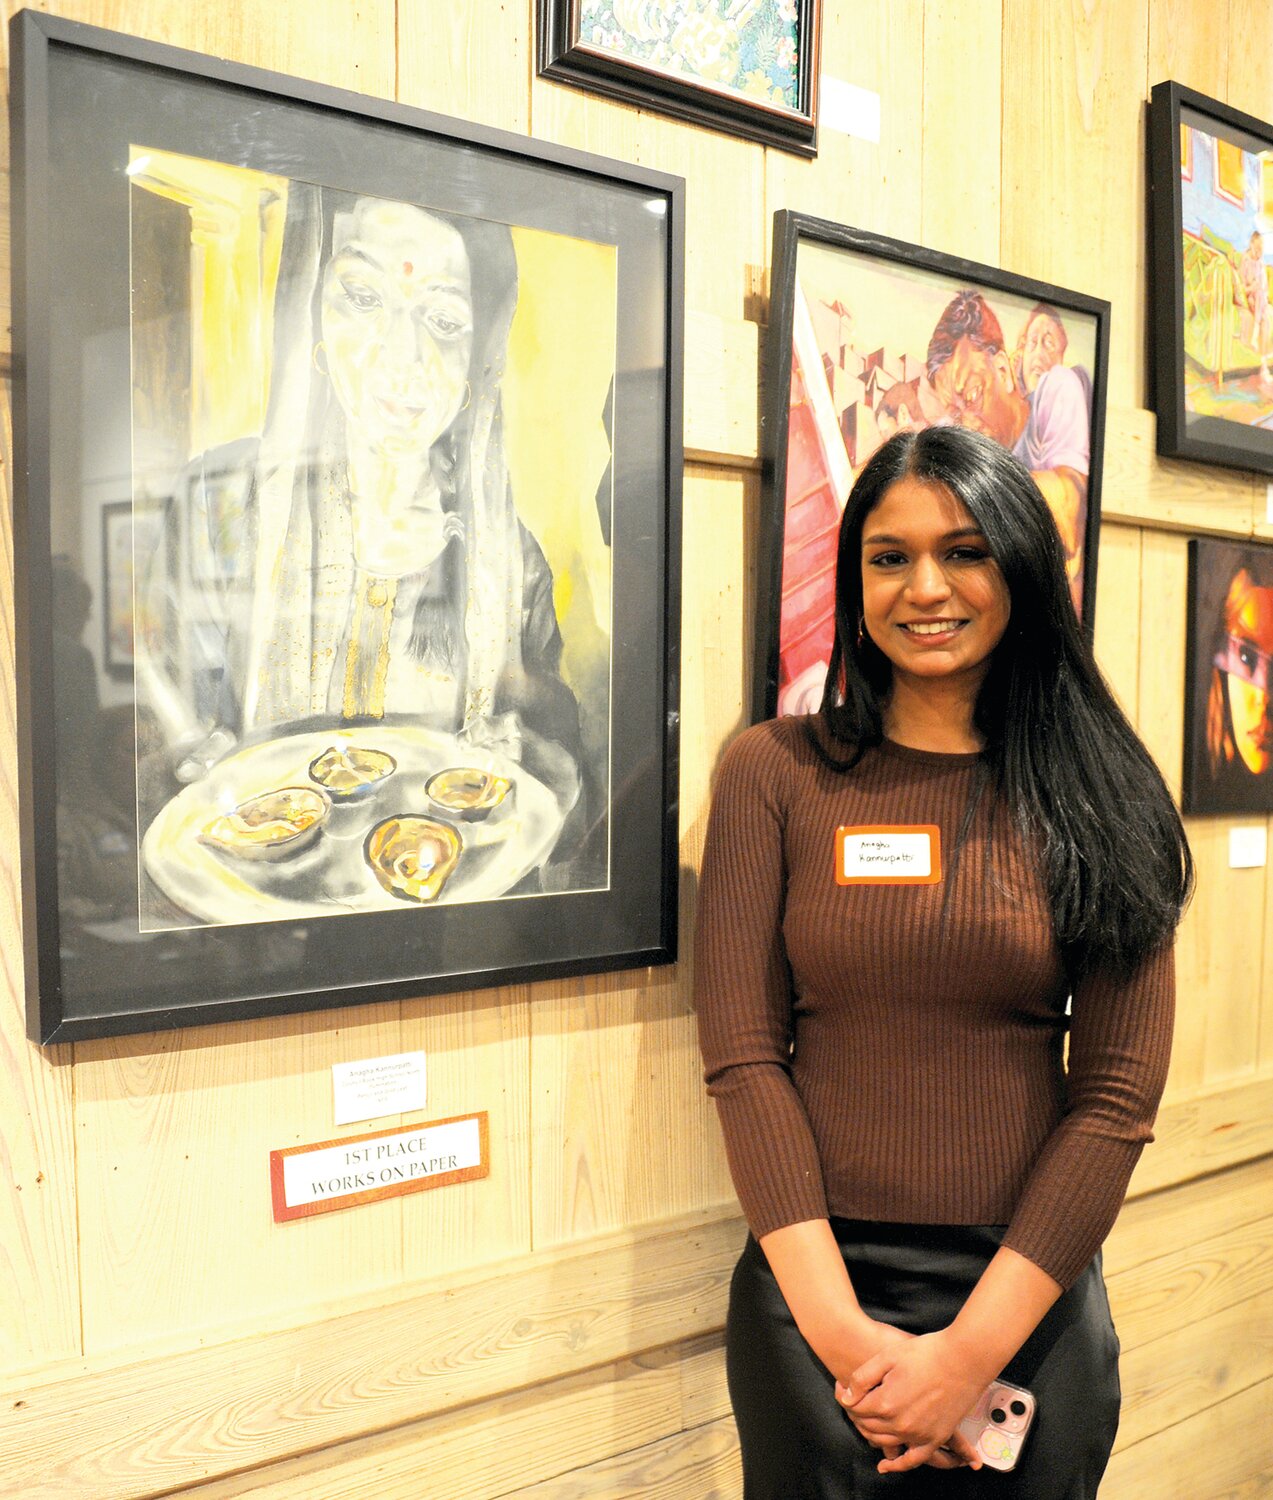 Anagha Kannurpatti stands next to her first-place work on paper “Illumination.”